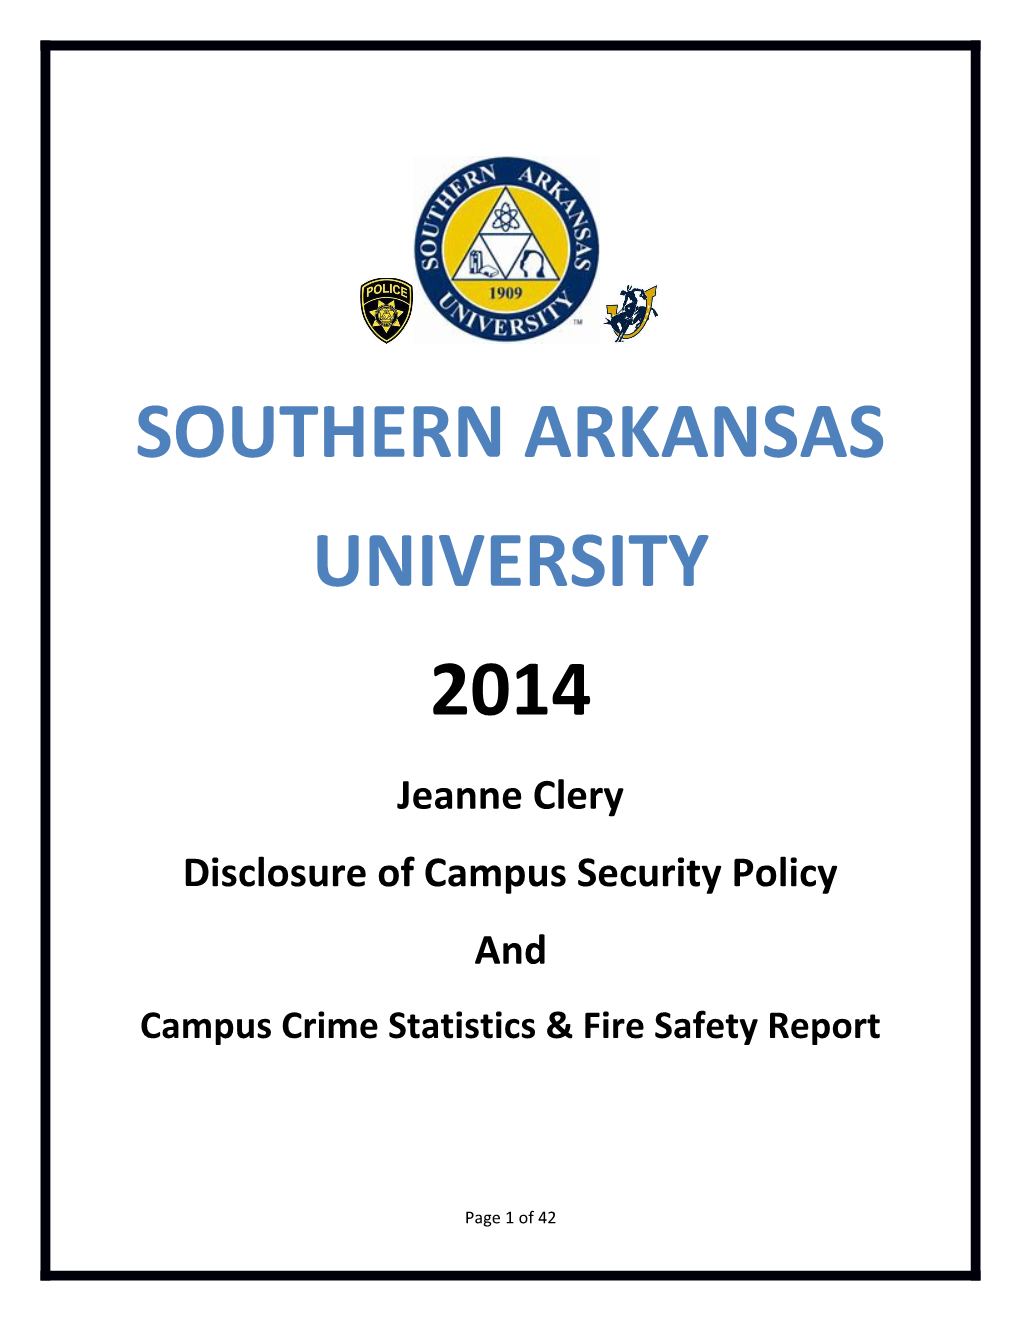 Disclosure of Campus Security Policy